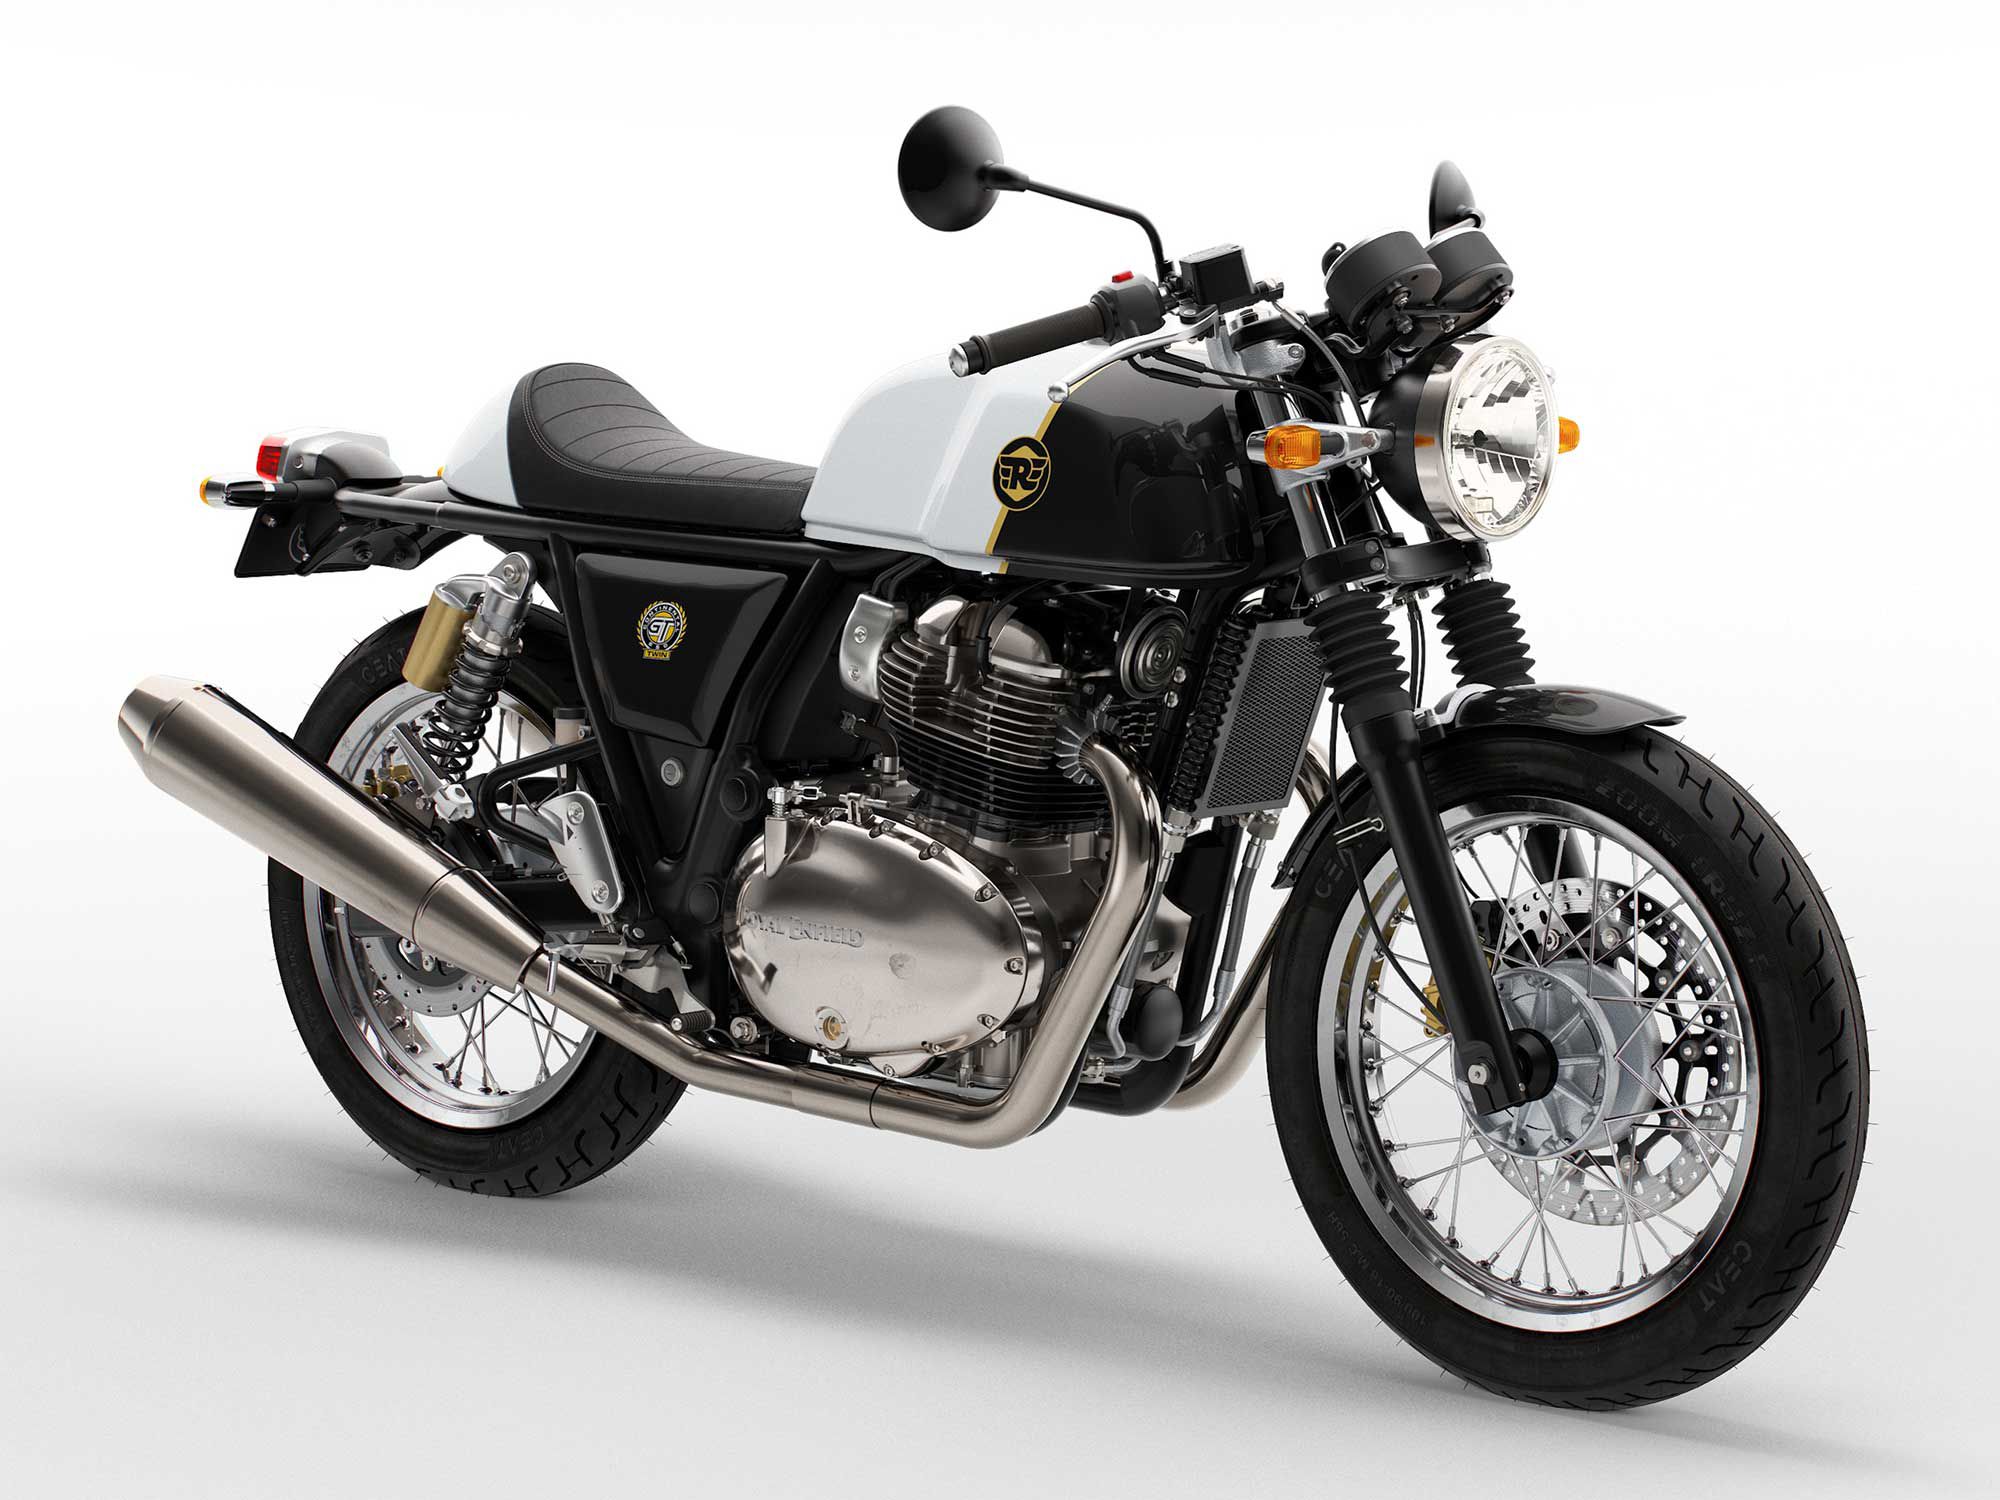 Royal Enfield continues to offer the Continental GT 650 in a variety of color options. Dux Deluxe (shown here) is among the two-tone offerings.